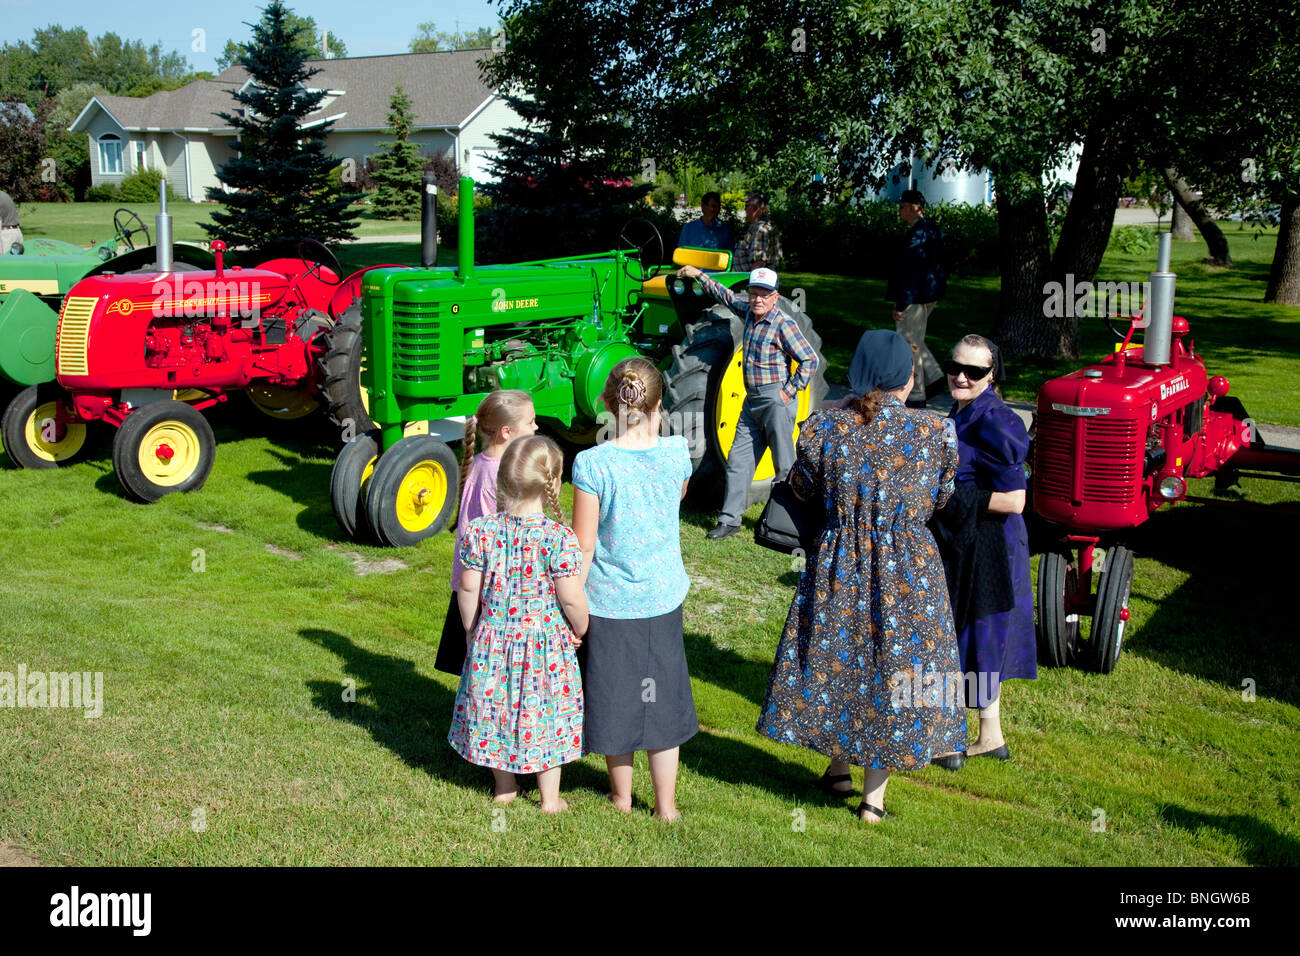 Preparing old tractors for the Tractor Trek in Reinland, Manitoba, Canada. Stock Photo